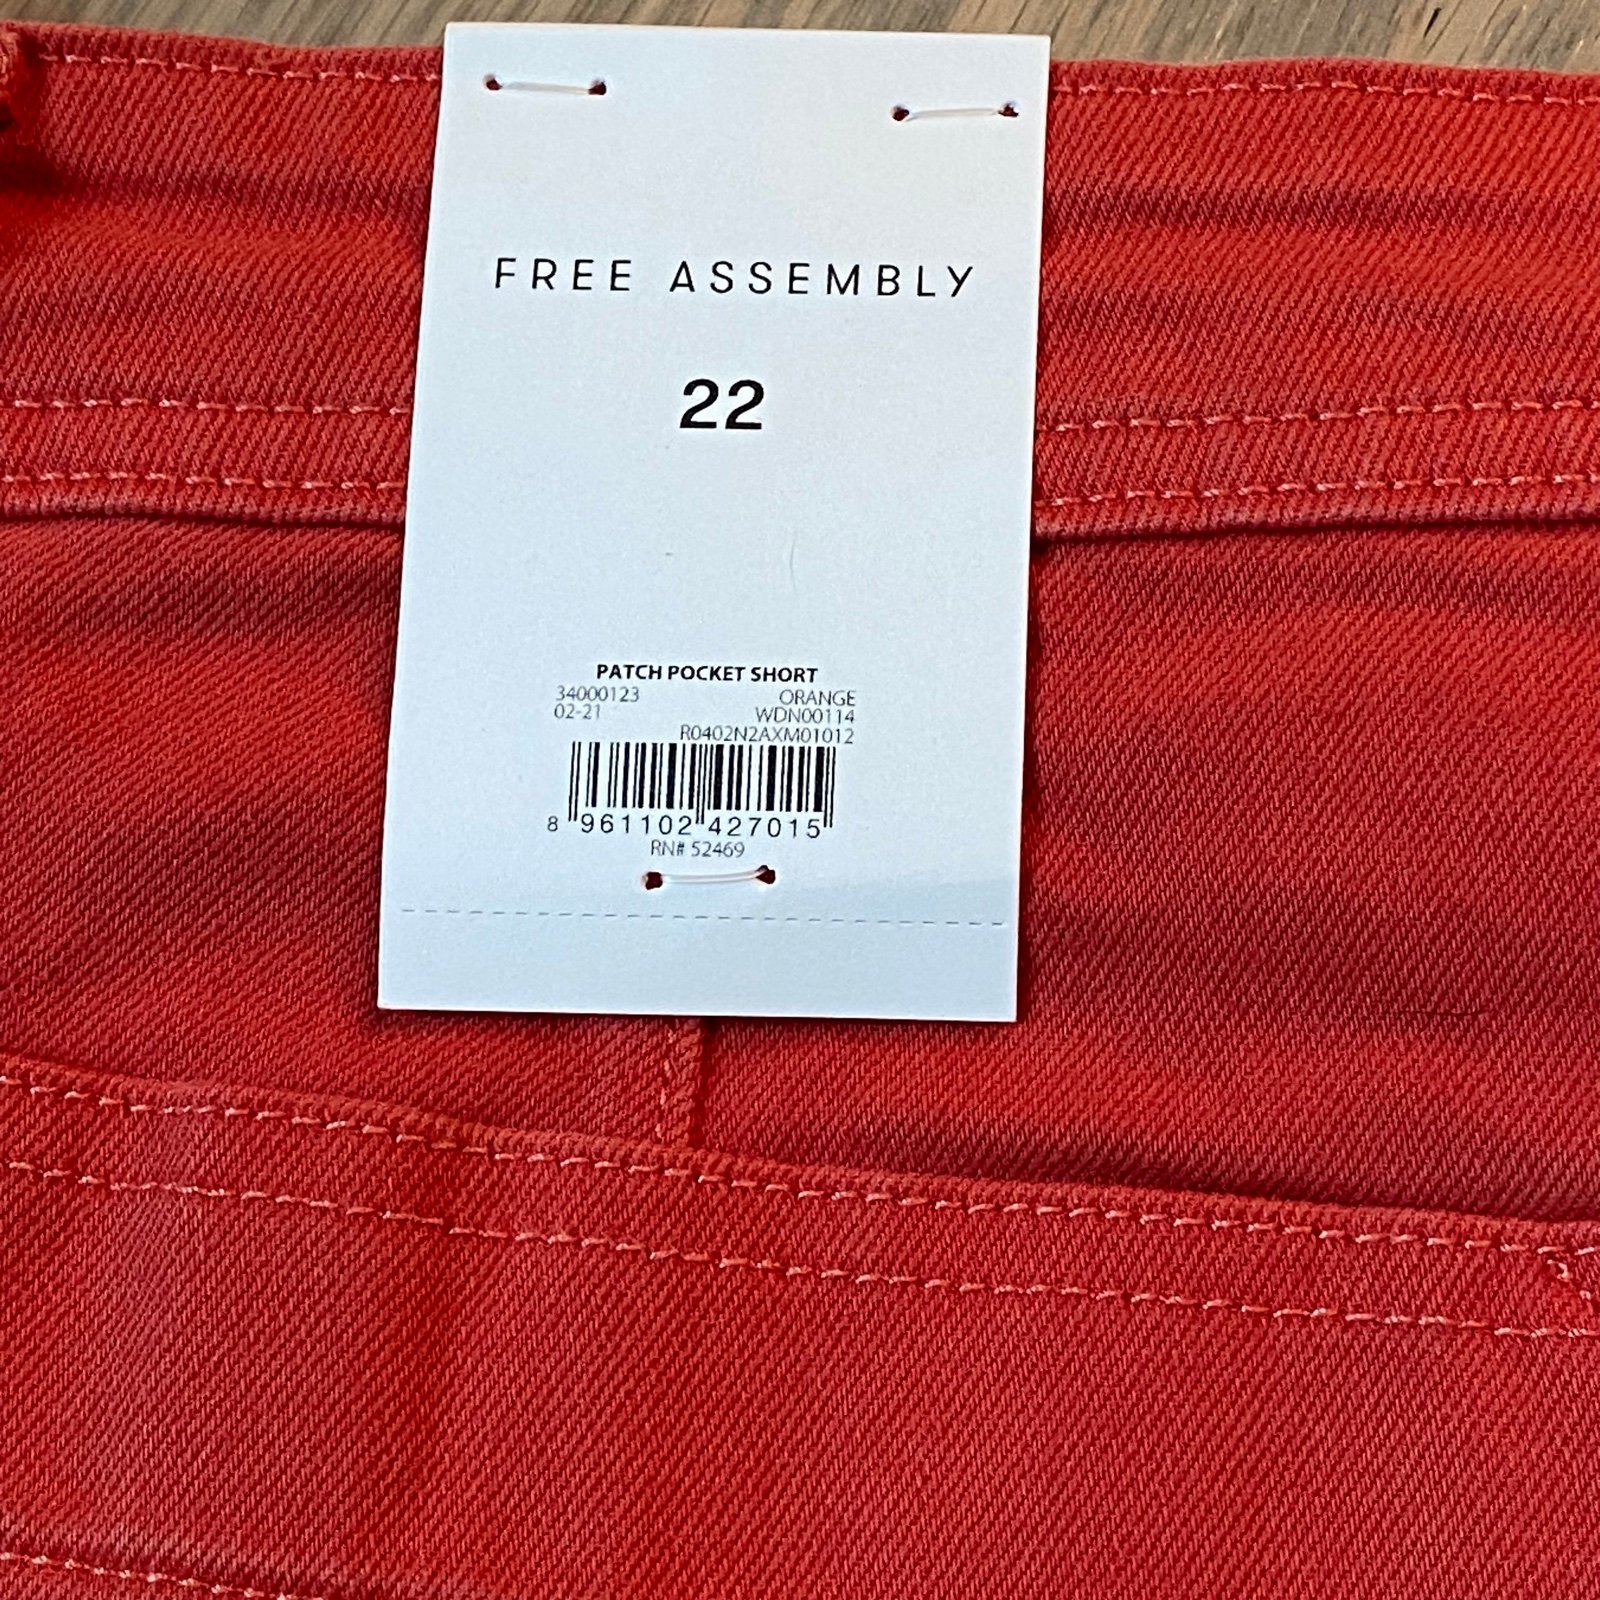 Special offer  NWT front pocket Jean red denim shorts size 22 LJq6re8ut Discount